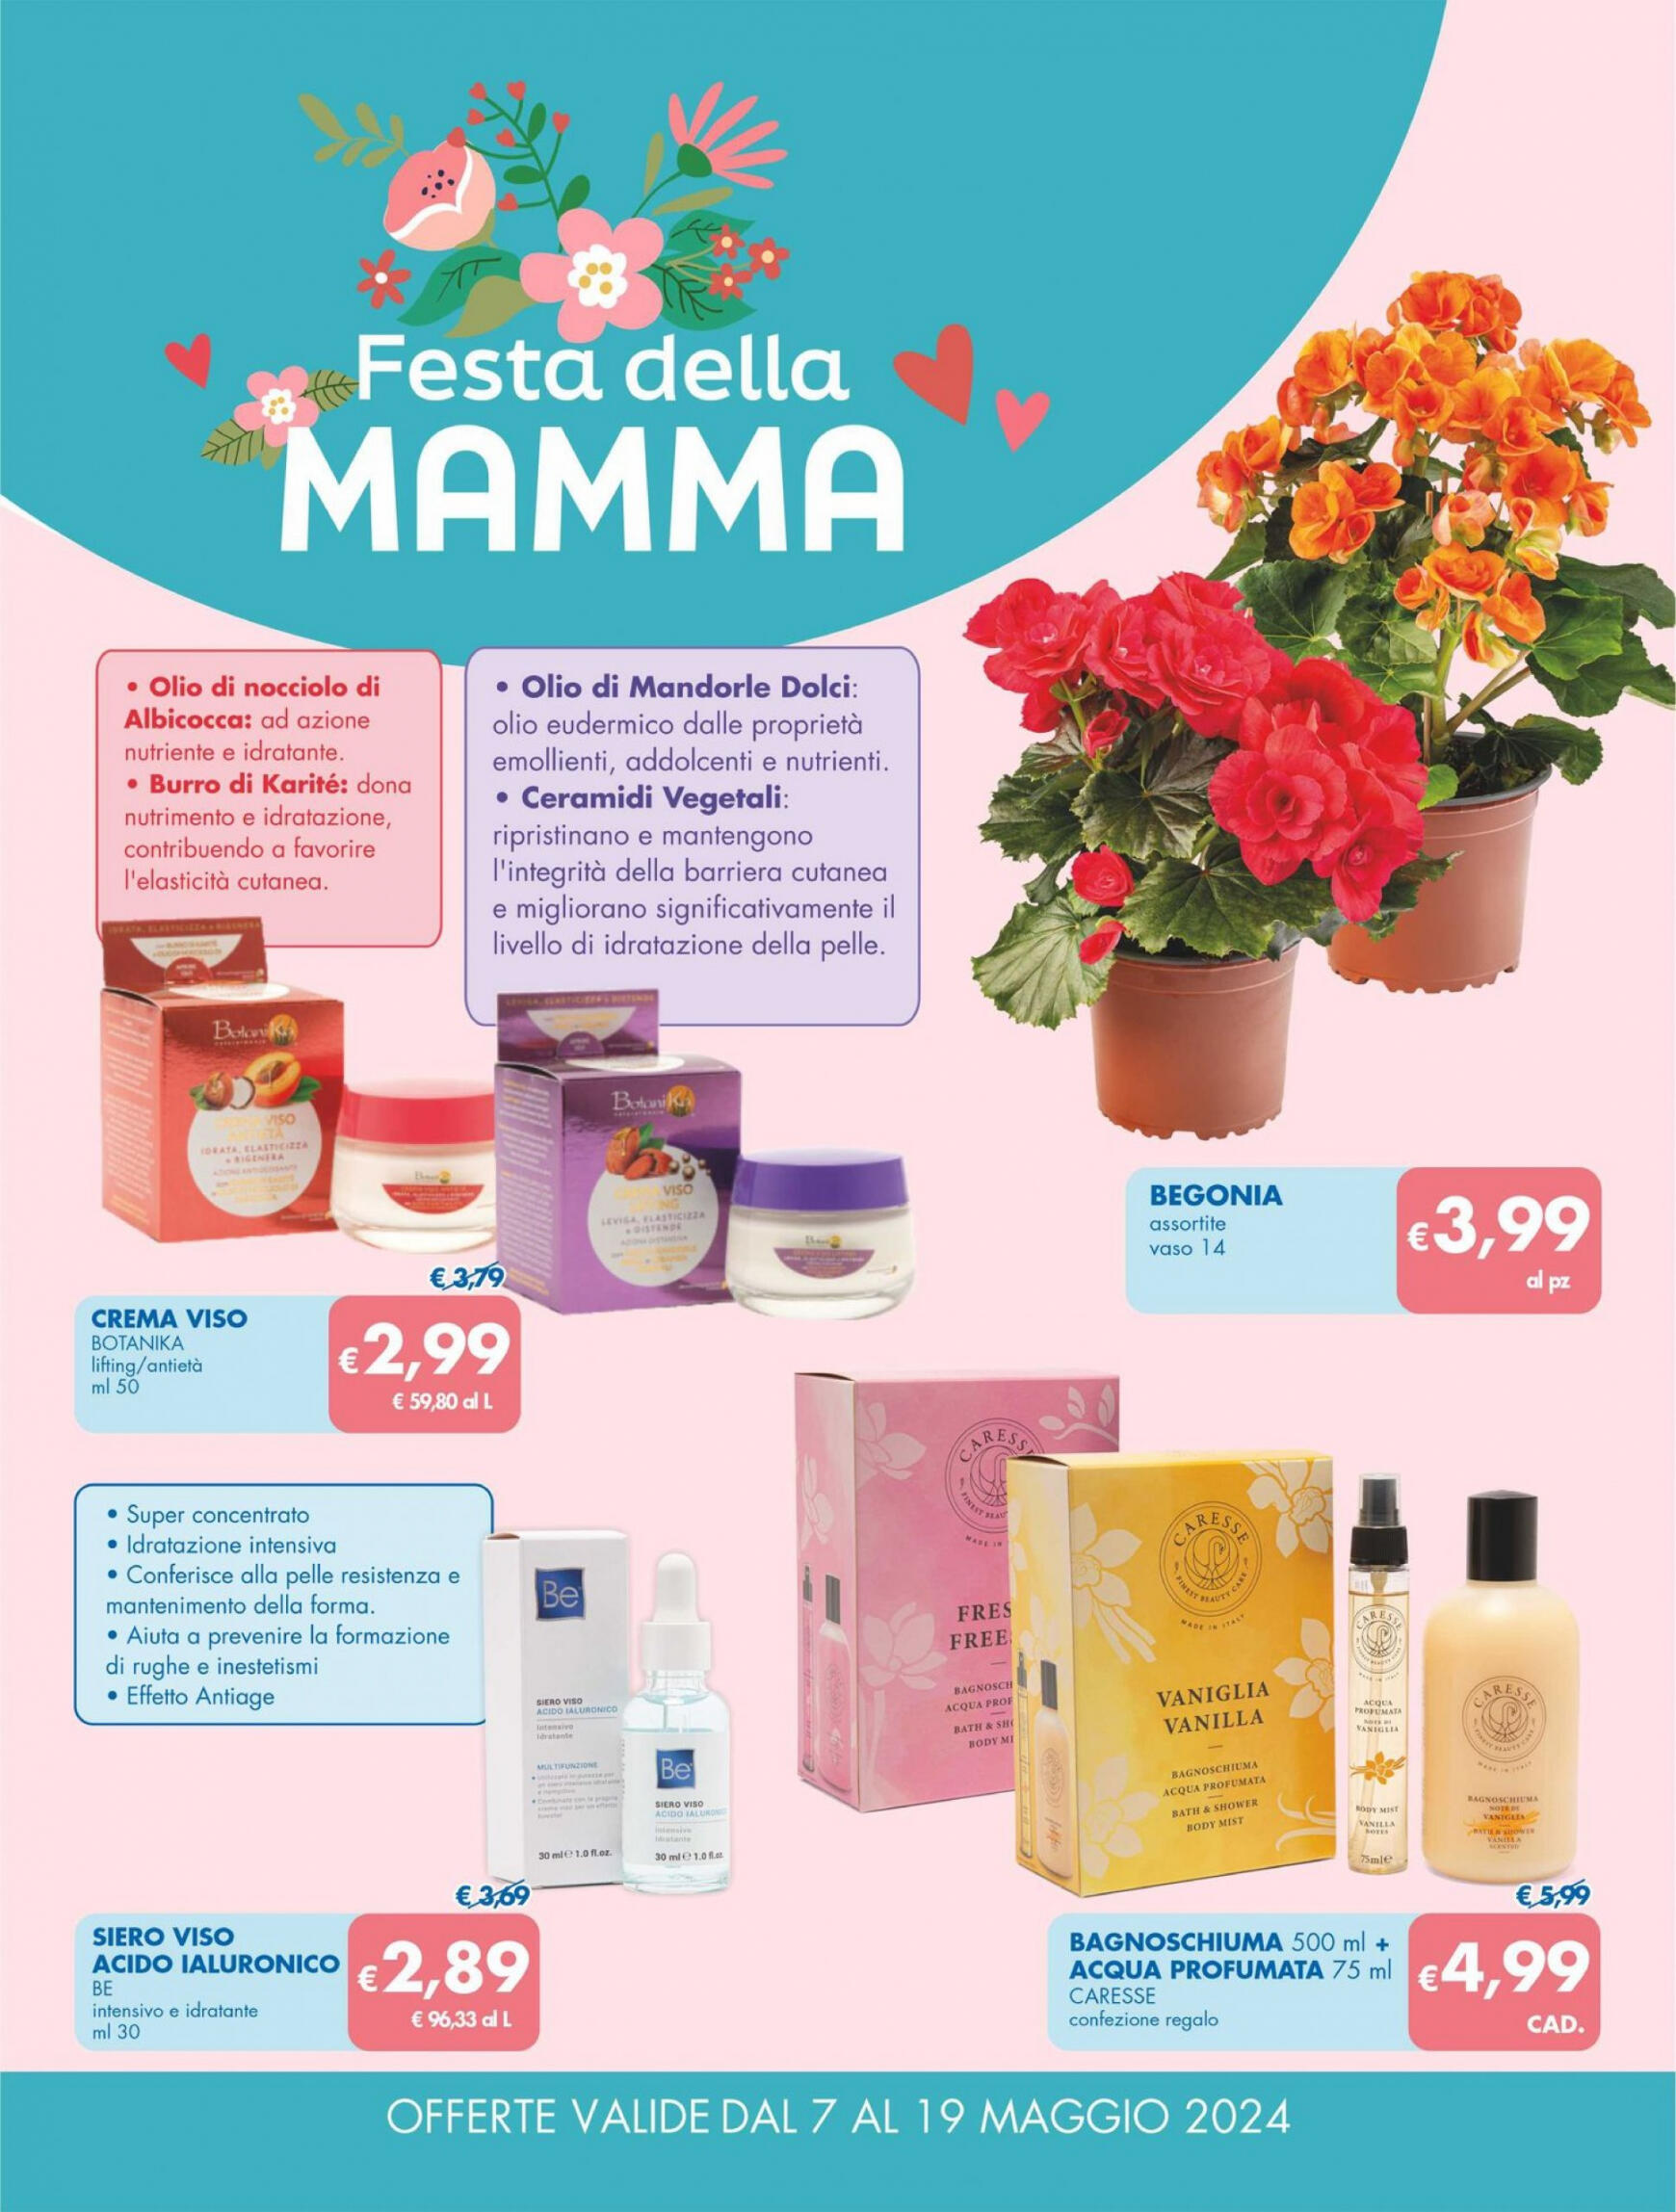 md-discount - Nuovo volantino MD - MD Discount 07.05. - 19.05. - page: 20